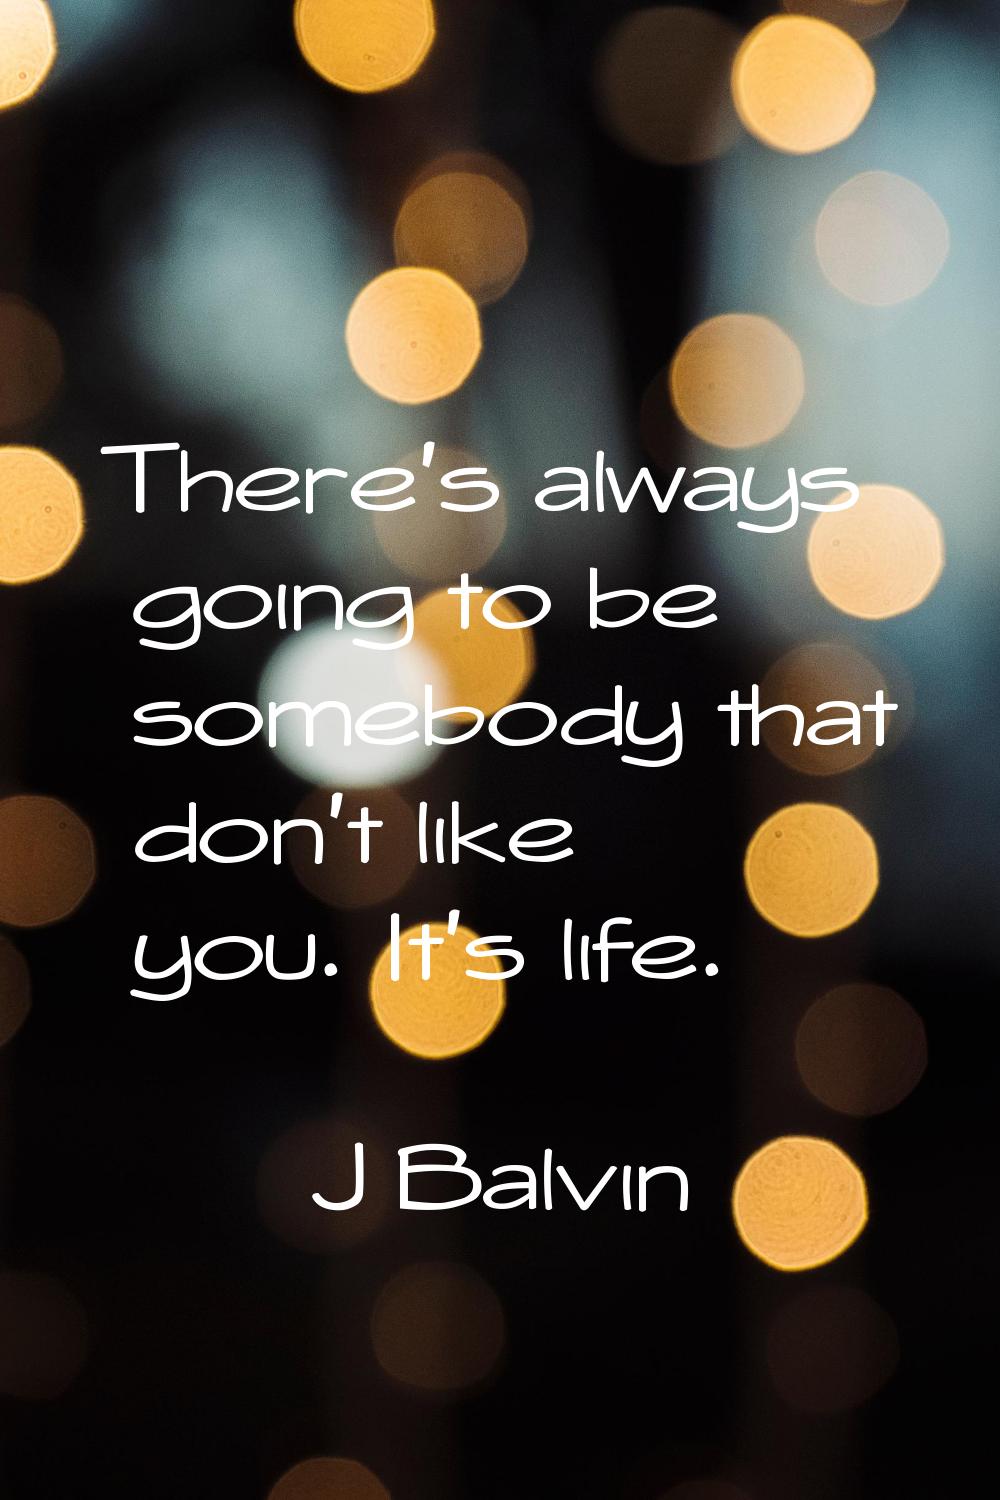 There's always going to be somebody that don't like you. It's life.